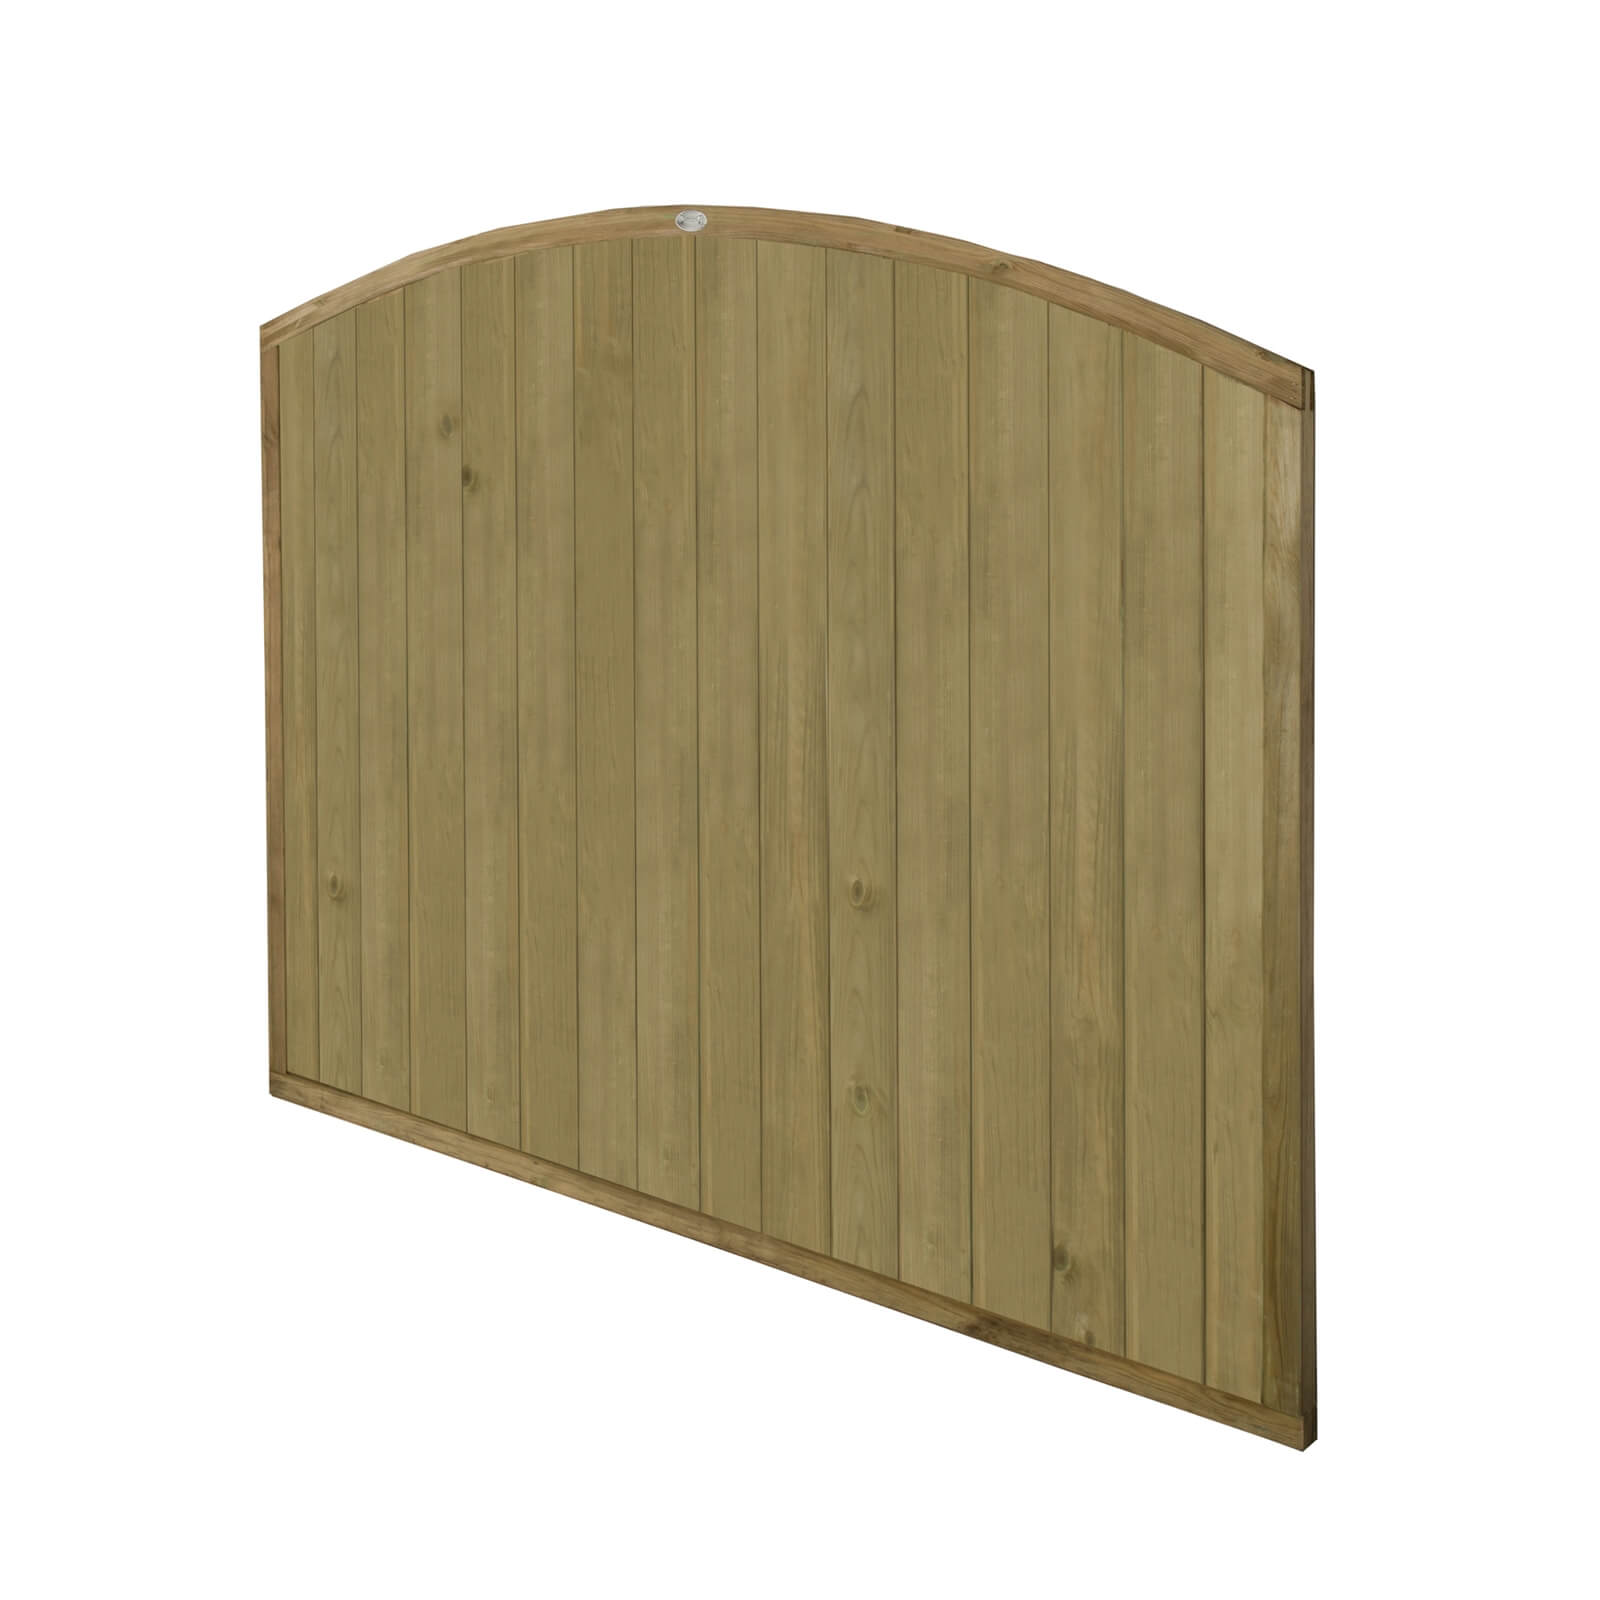 Forest Dome Tongue and Groove Panel - 5ft - Pack of 4